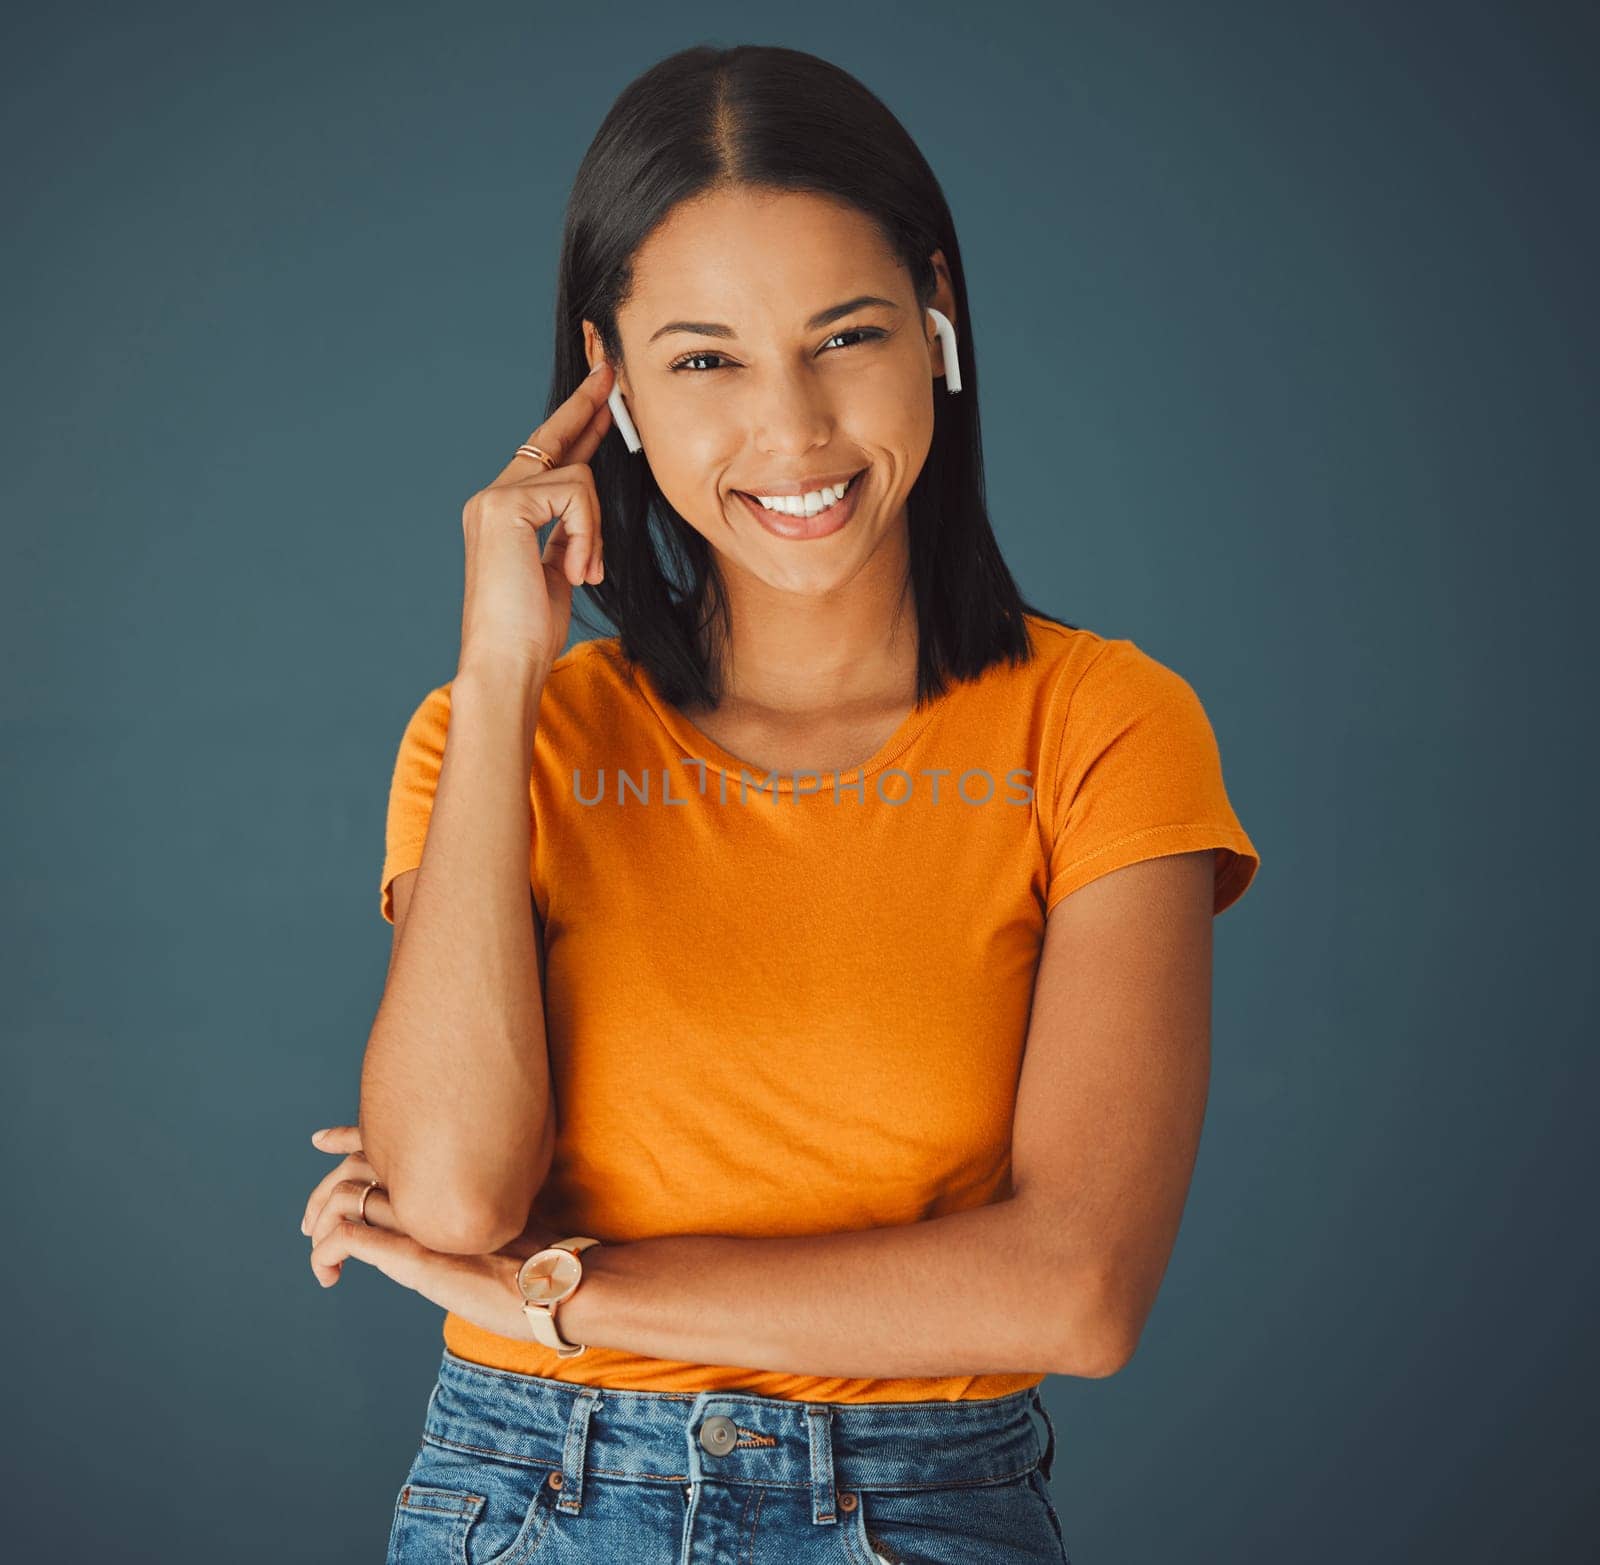 Woman, portrait and listening to music online while happy on a studio background. Smile on face of a young gen z person with earphones for podcast, radio or audio sound to relax while streaming.